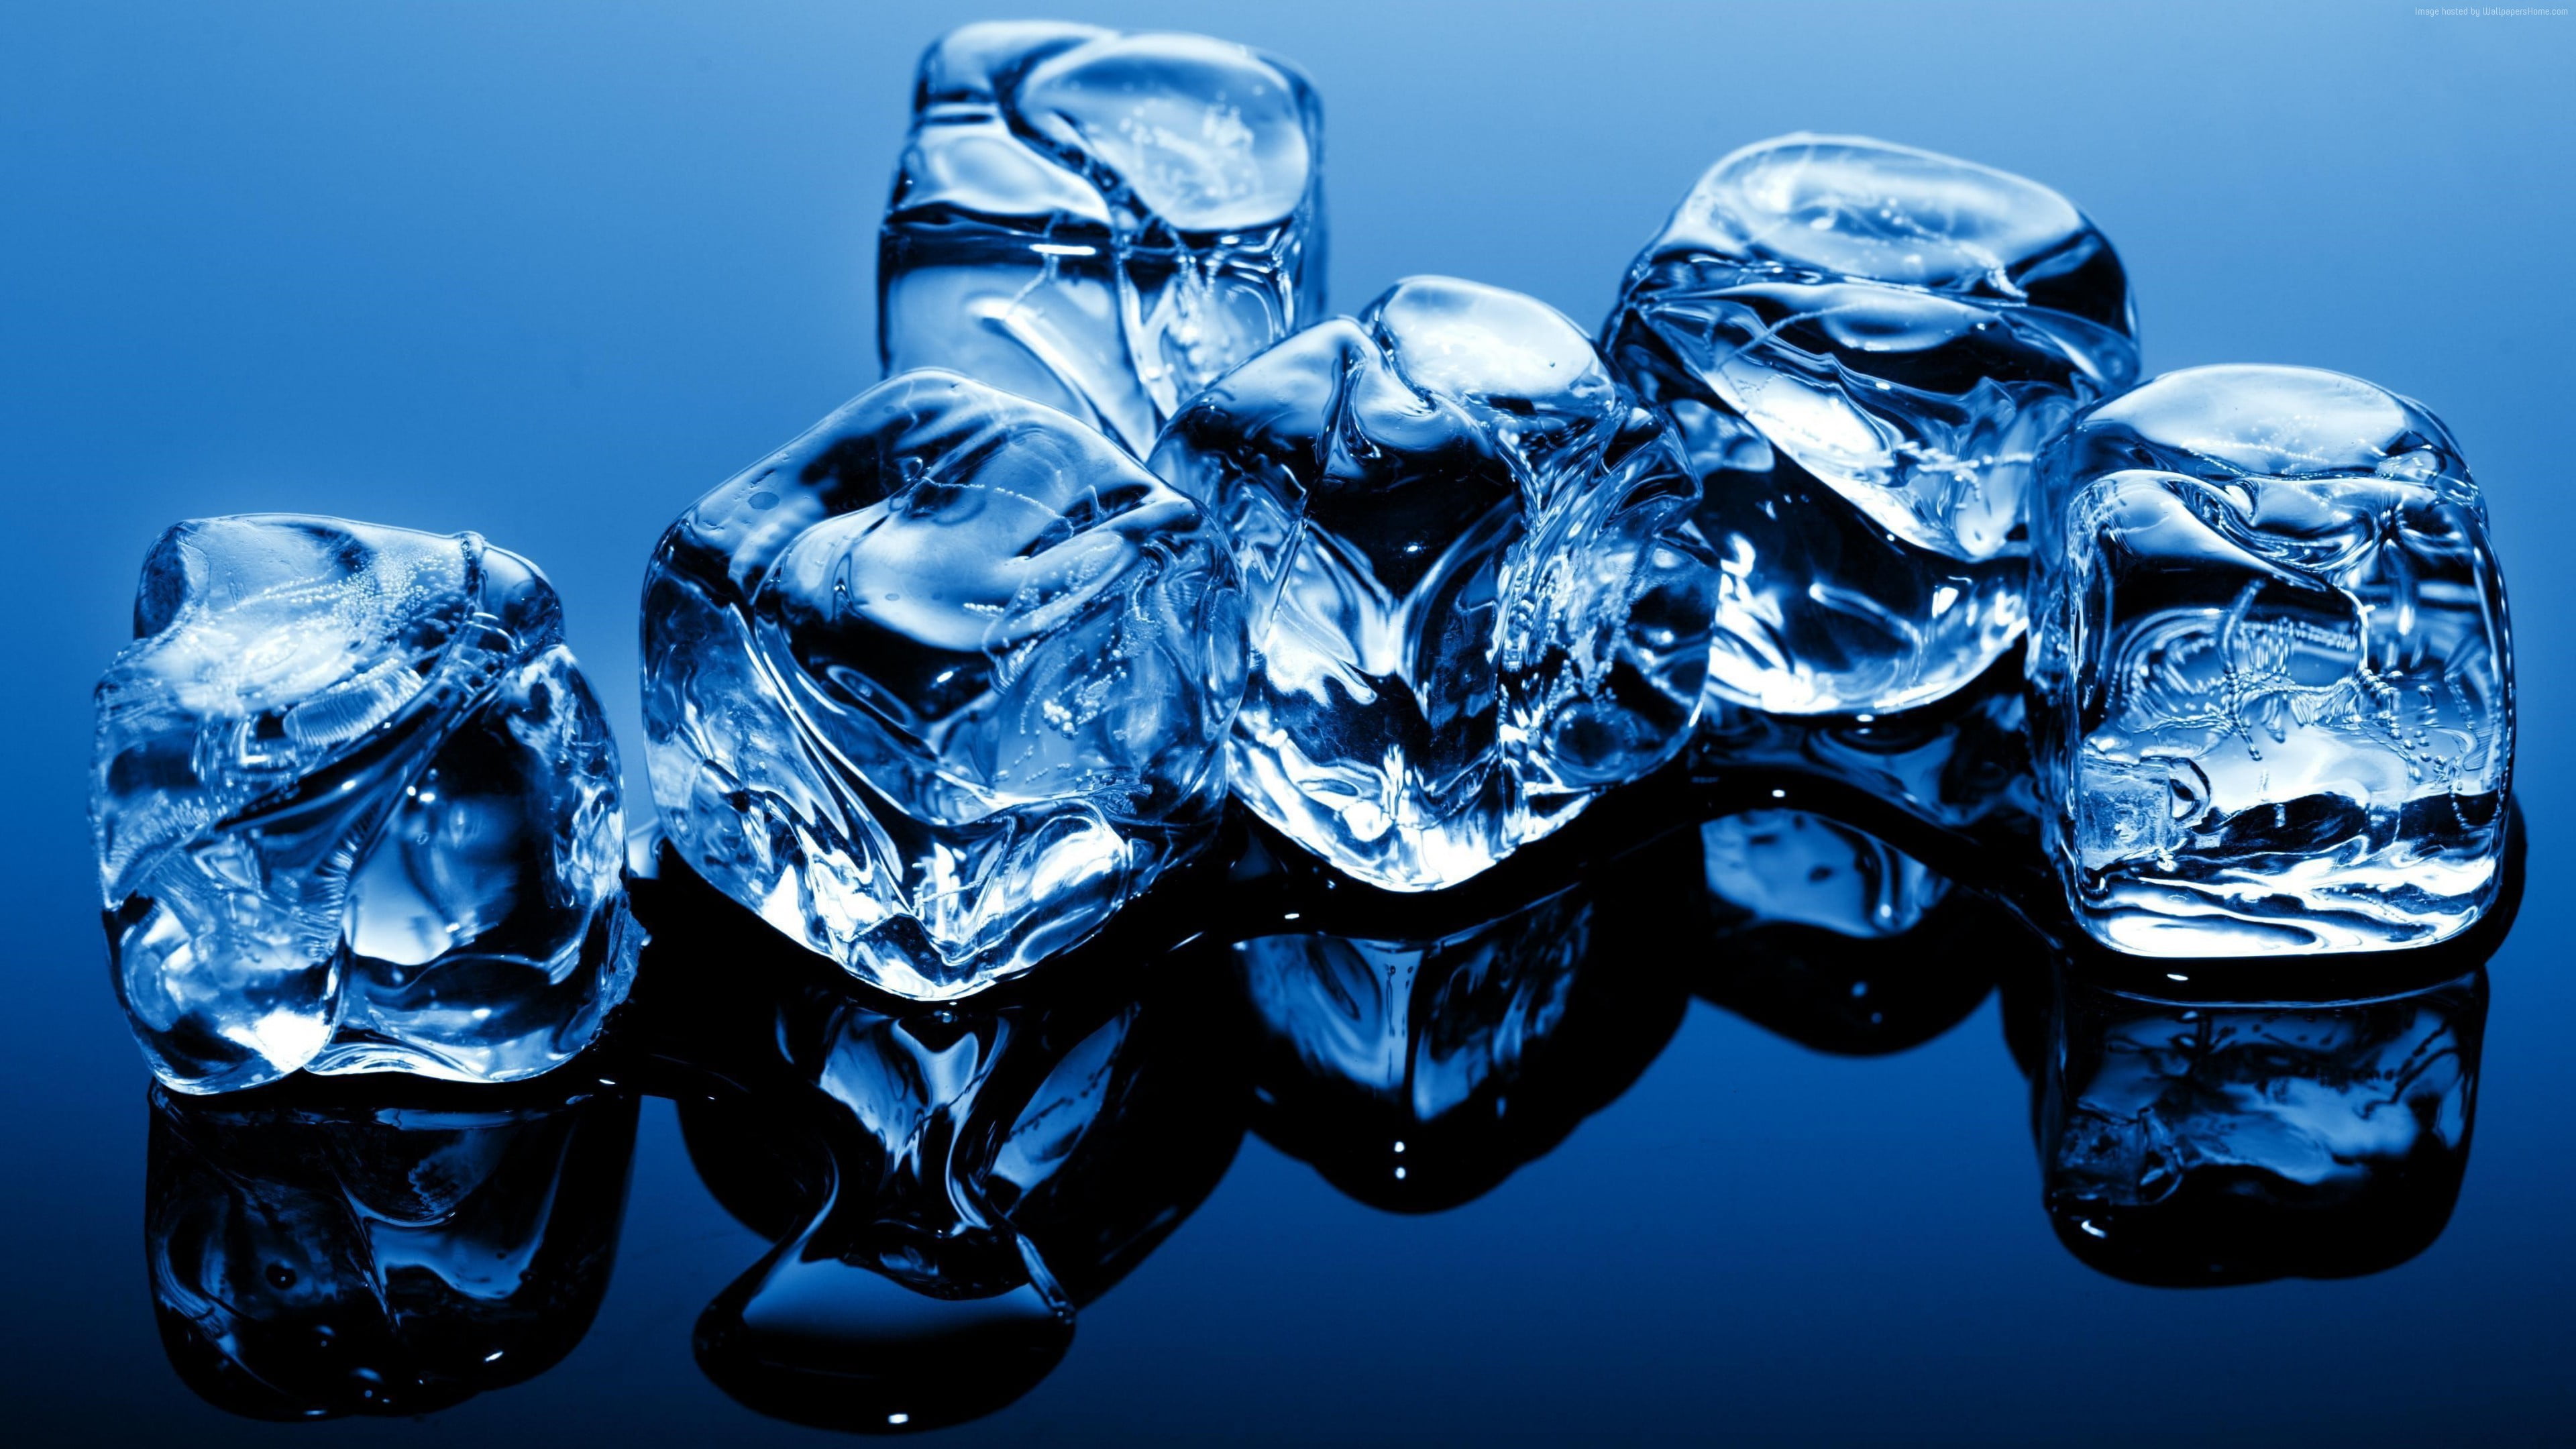 Clear Ice Cubes Ice Cubes Ice Water Blue Hd Wallpaper Wallpaper Flare